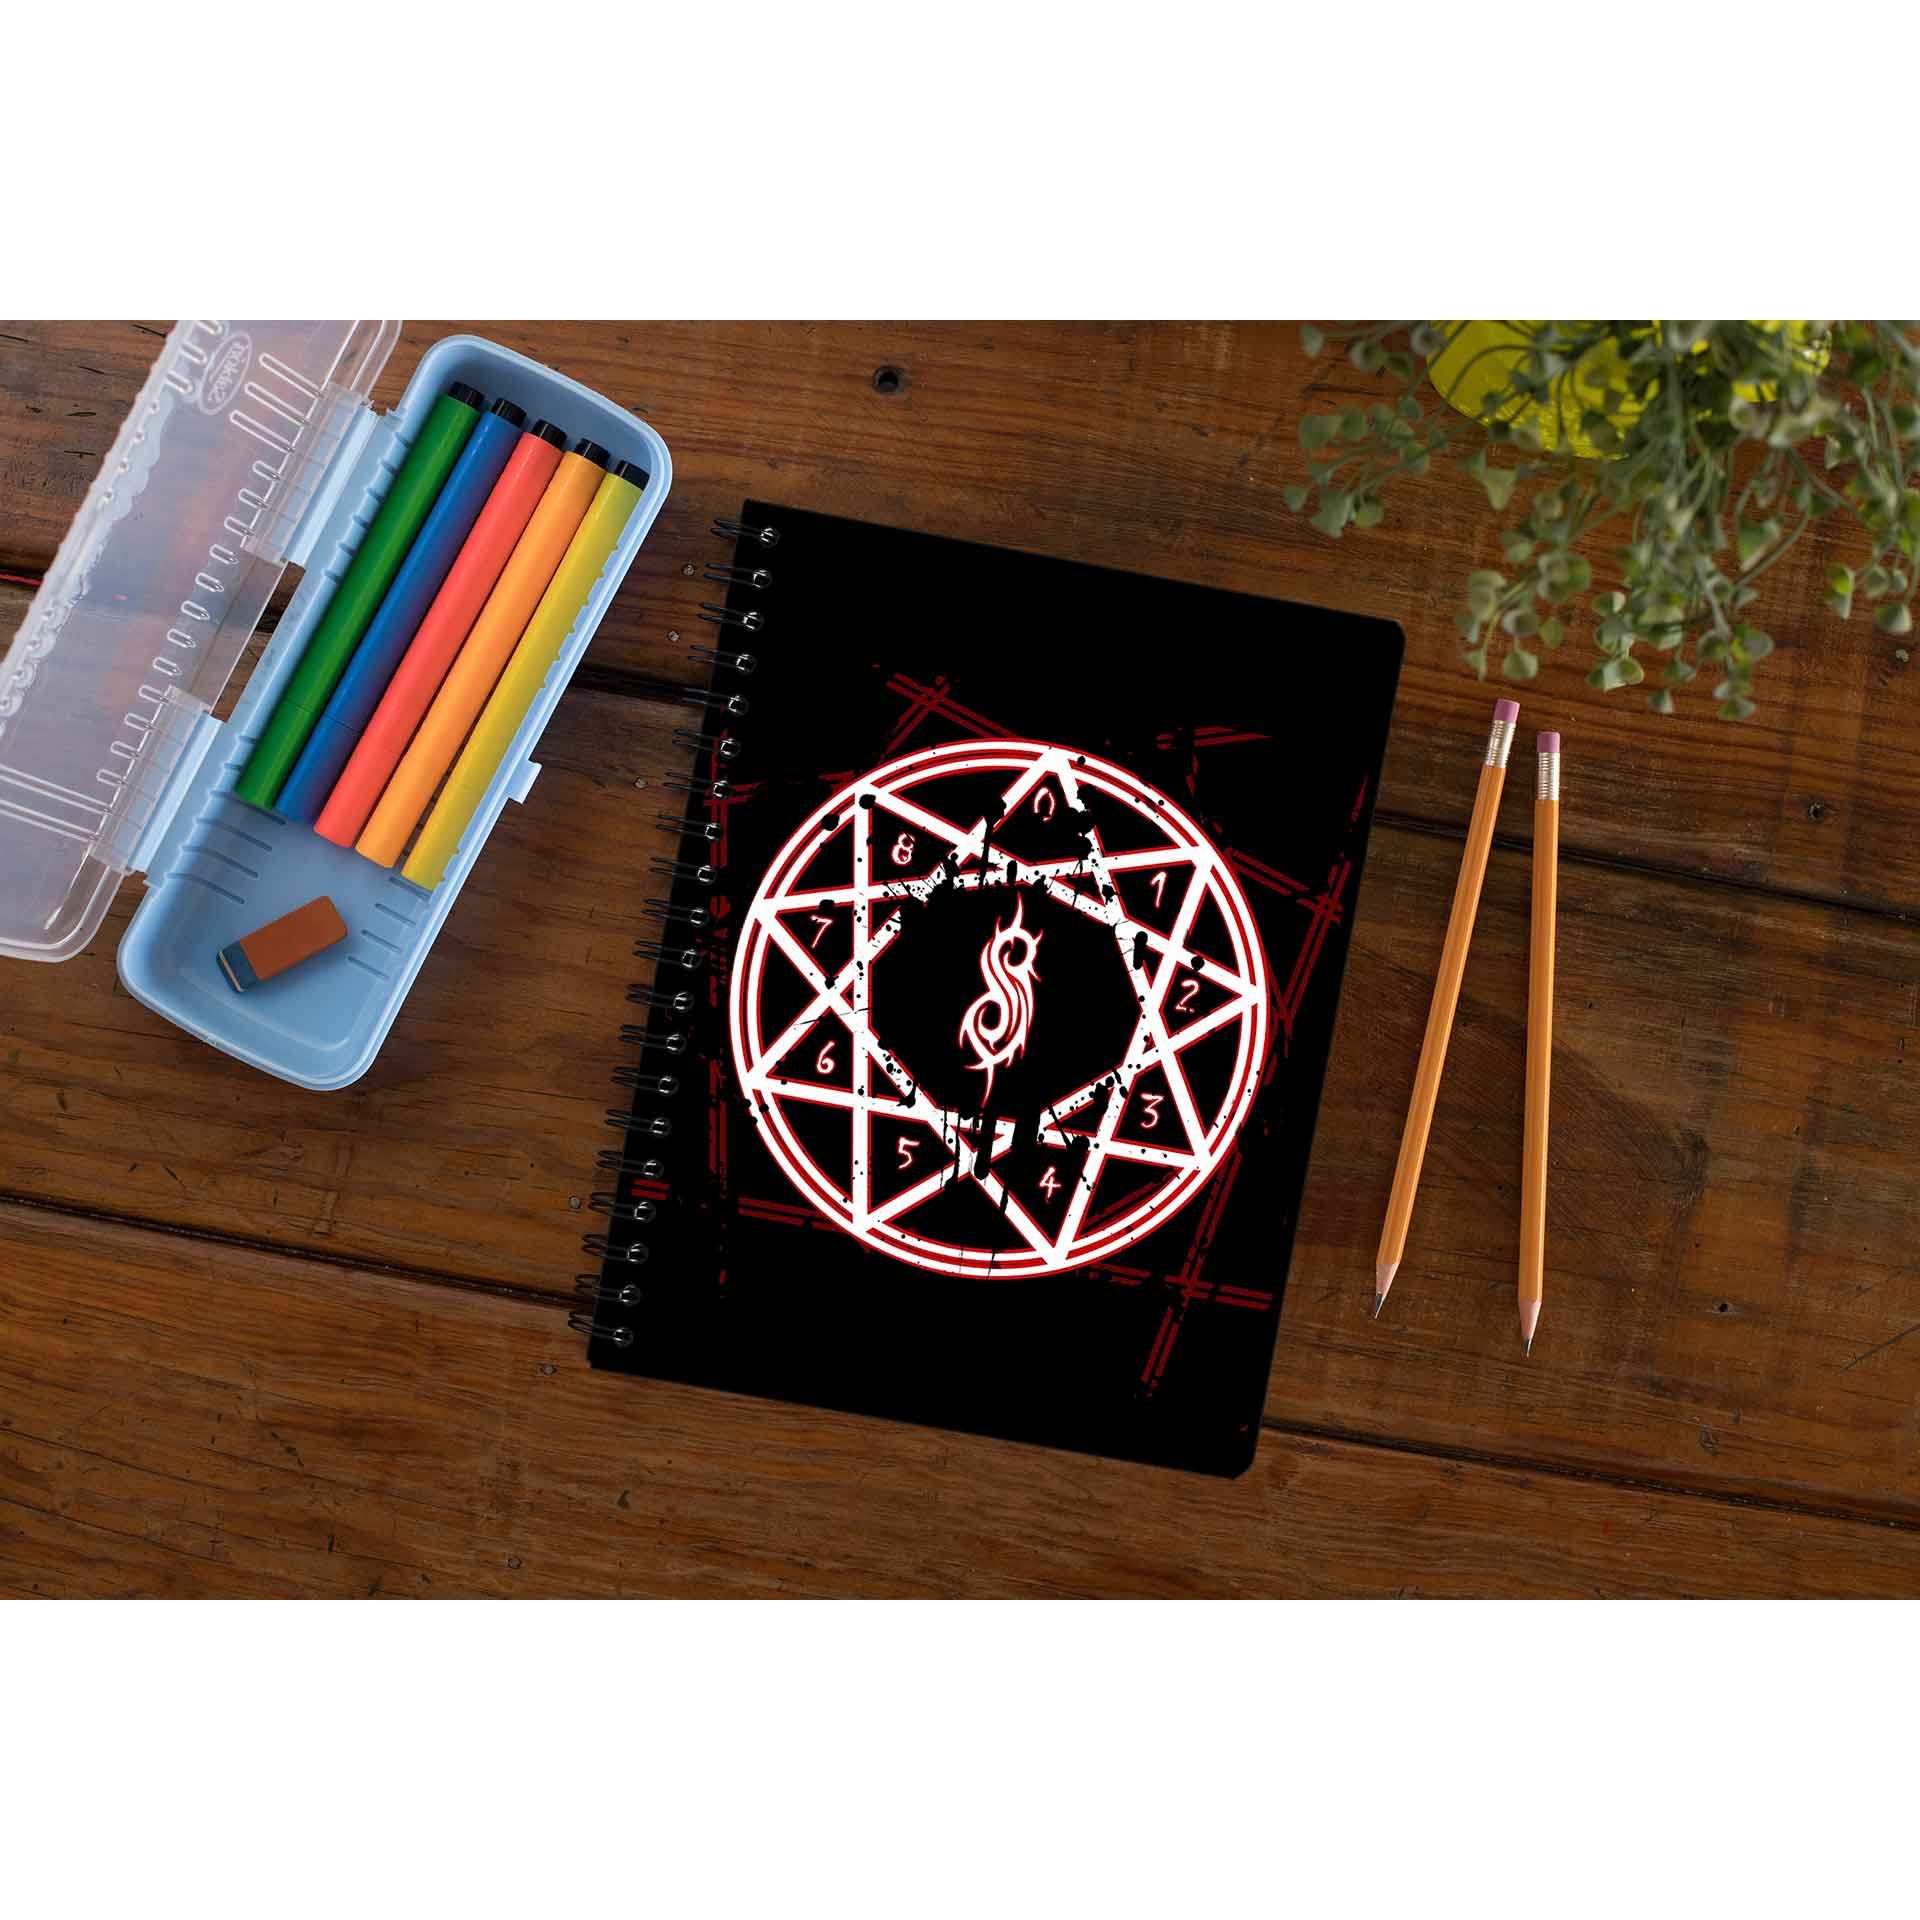 slipknot nonagram notebook notepad diary buy online united states of america usa the banyan tee tbt unruled